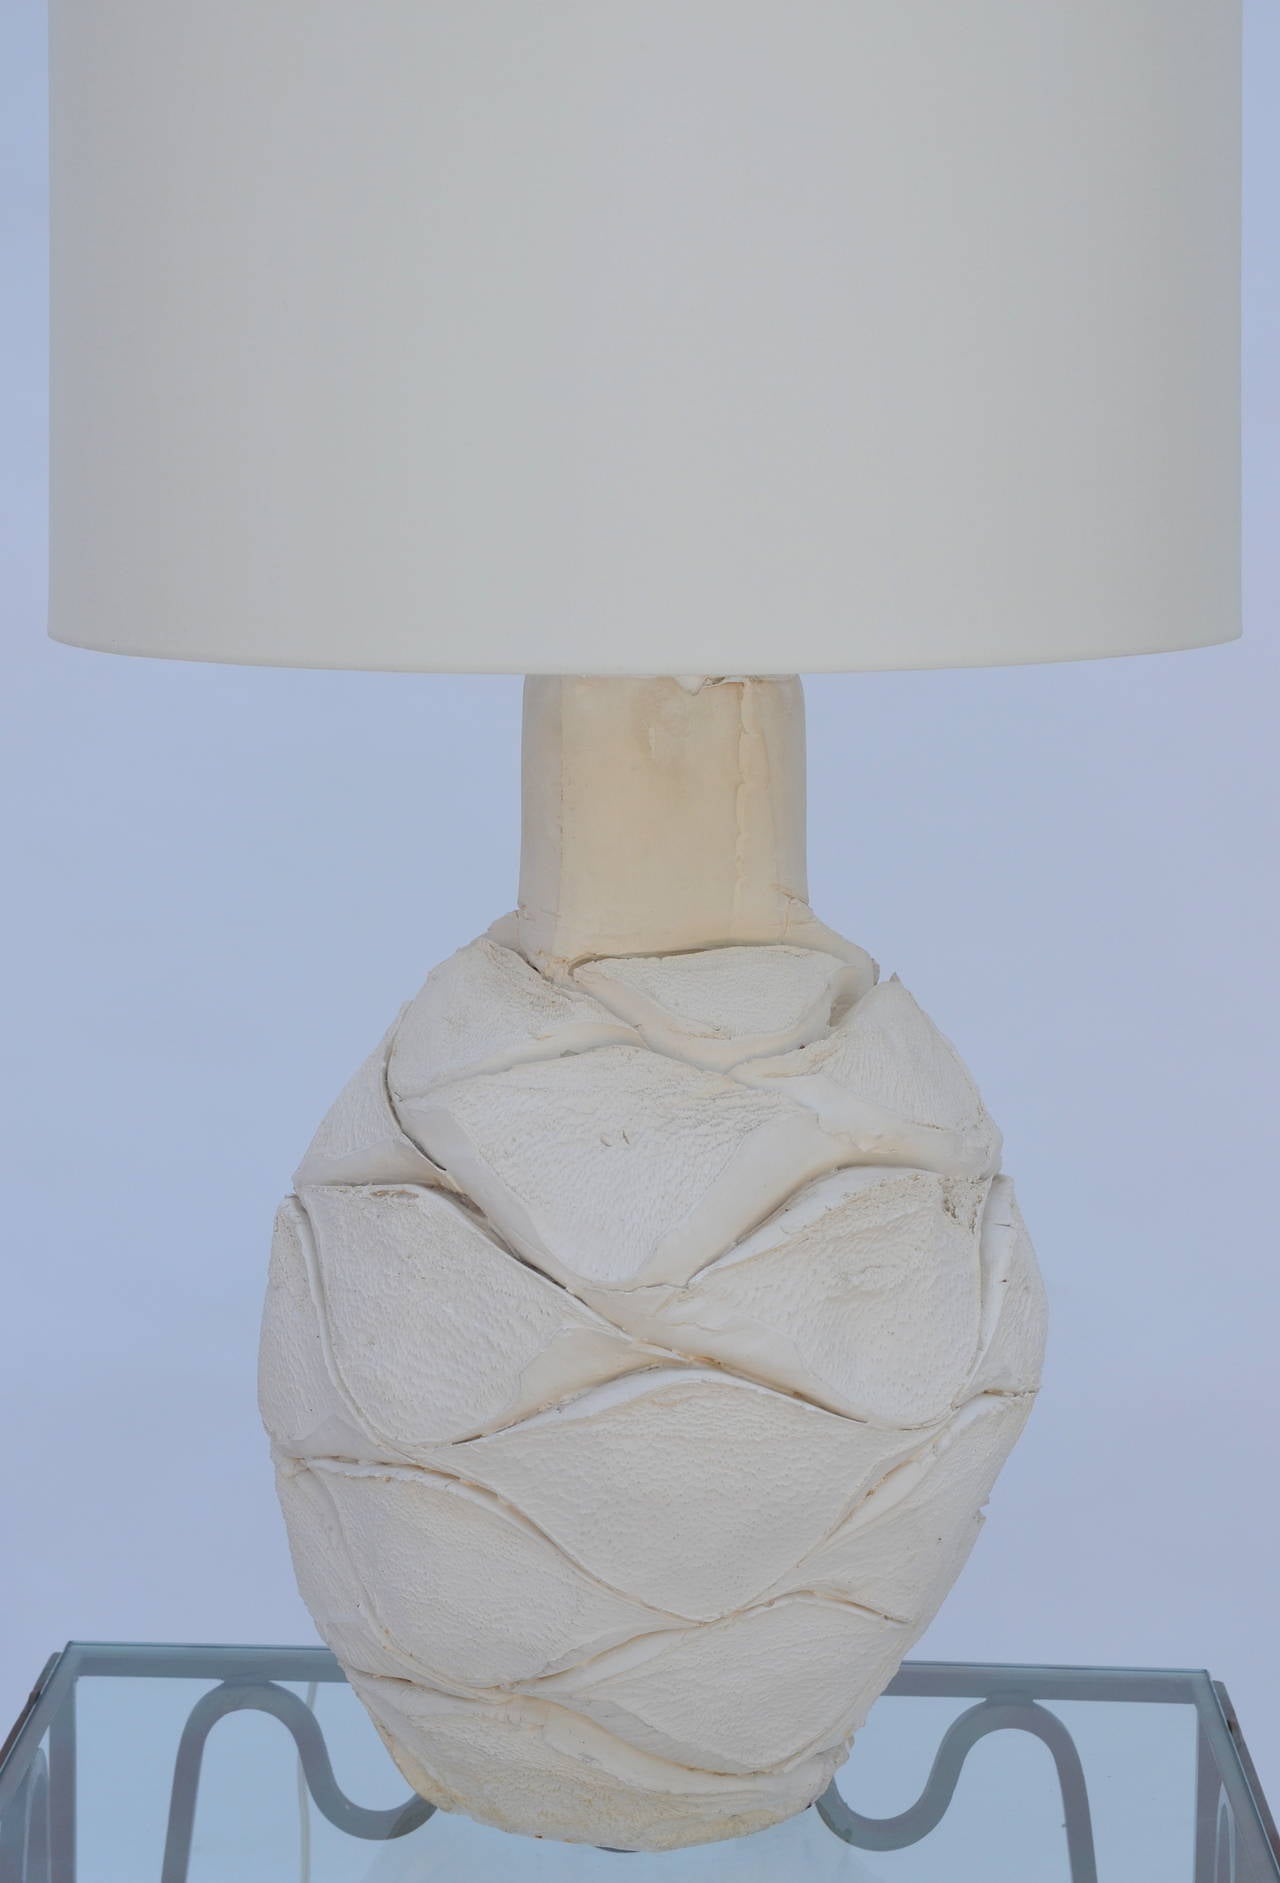 Pair of large organic white plaster lamps in the style of Alberto Pinto. Custom shades (20 in. top rim diameter x 20.5 bottom rim diameter x 13.5 in. tall) optional: $500 for the pair of custom silk shades.